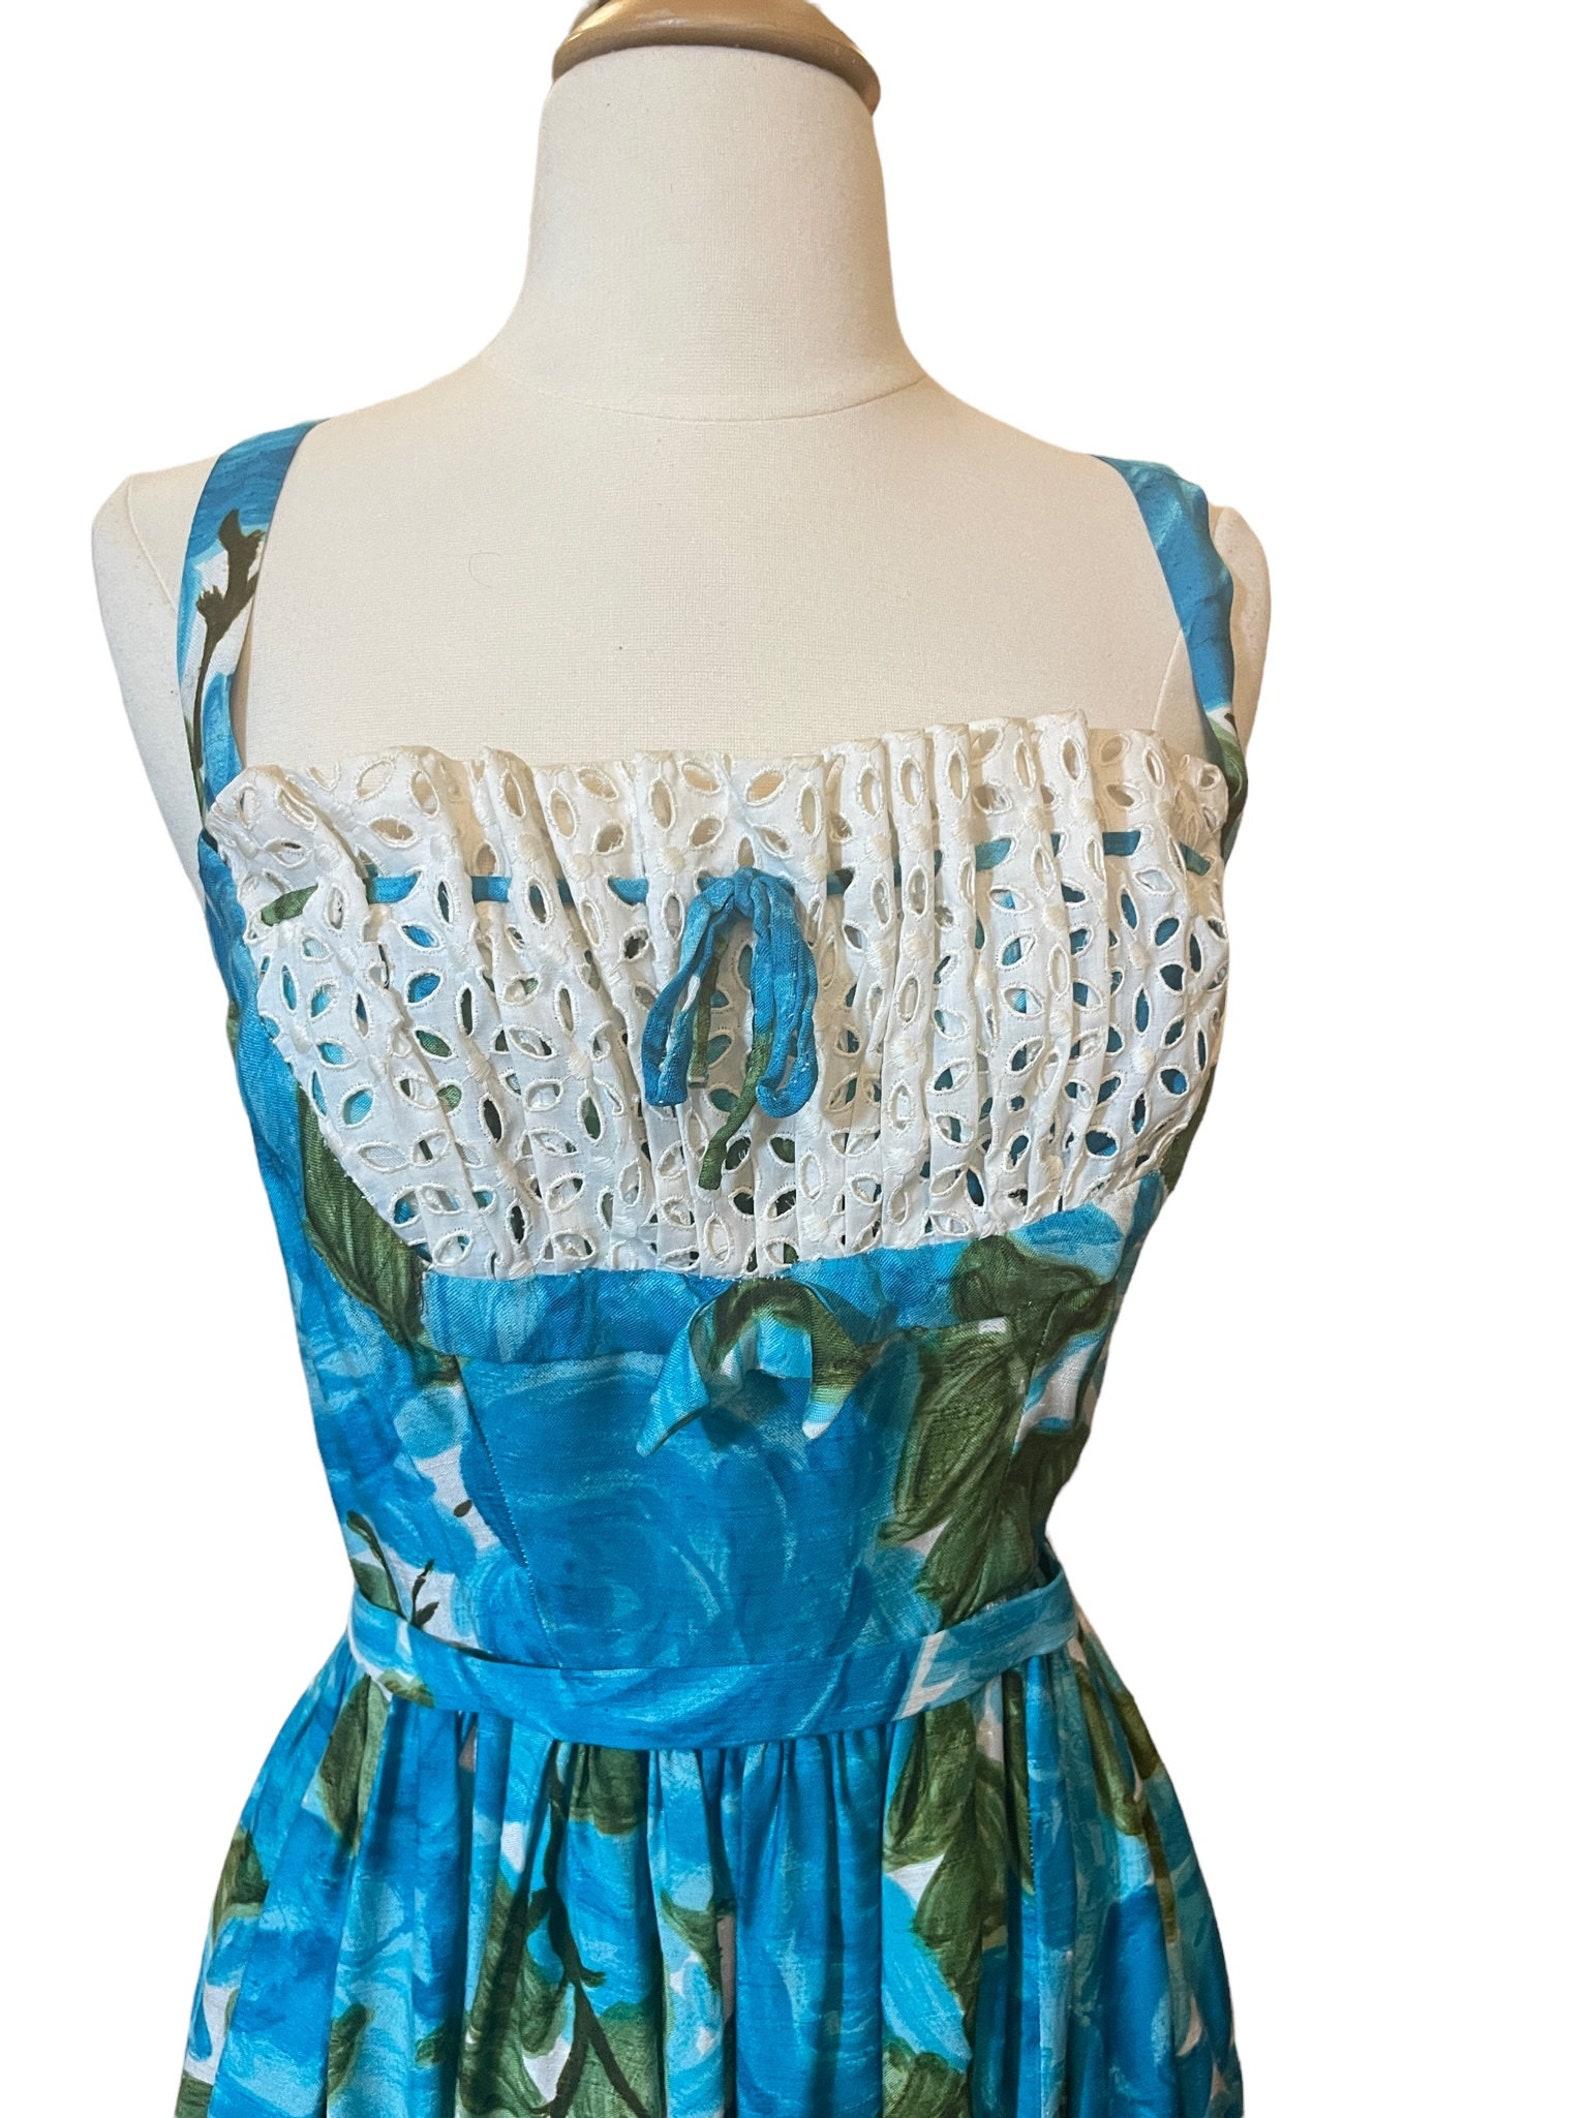 Blue and Green Watercolor Floral Sun Dress, Circa 1950s In Excellent Condition For Sale In Brooklyn, NY